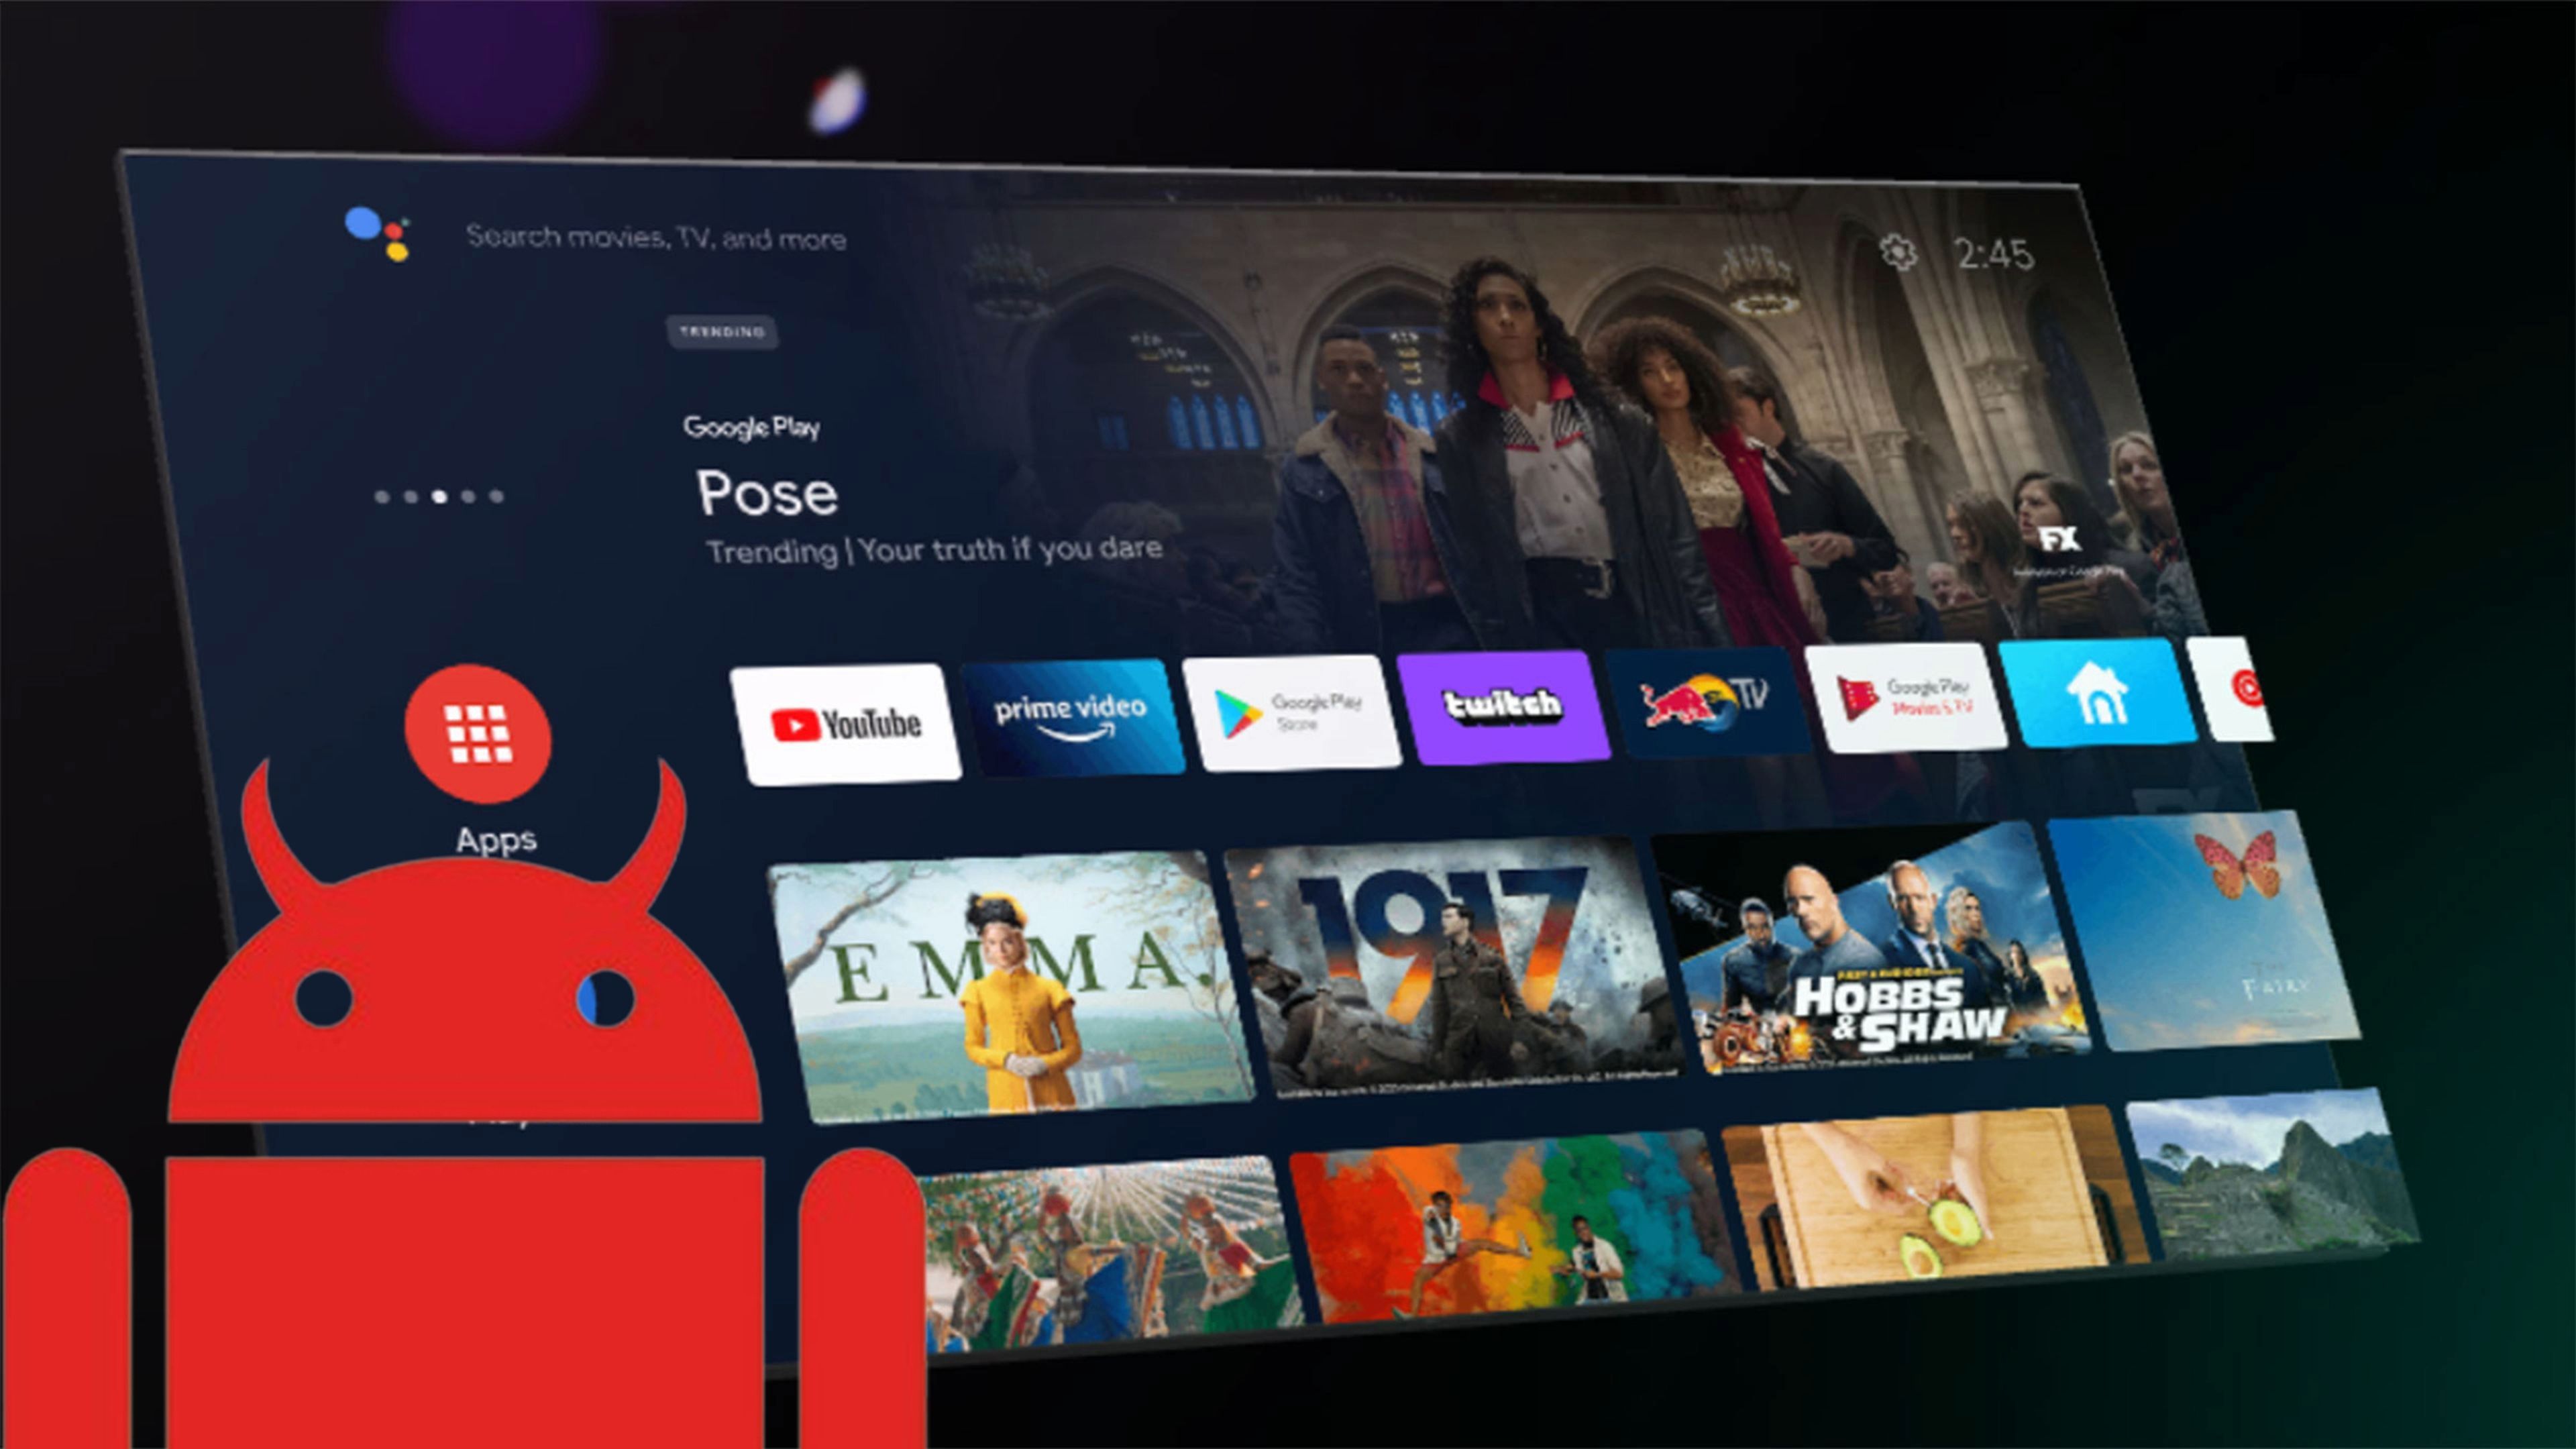 Malware Android TV